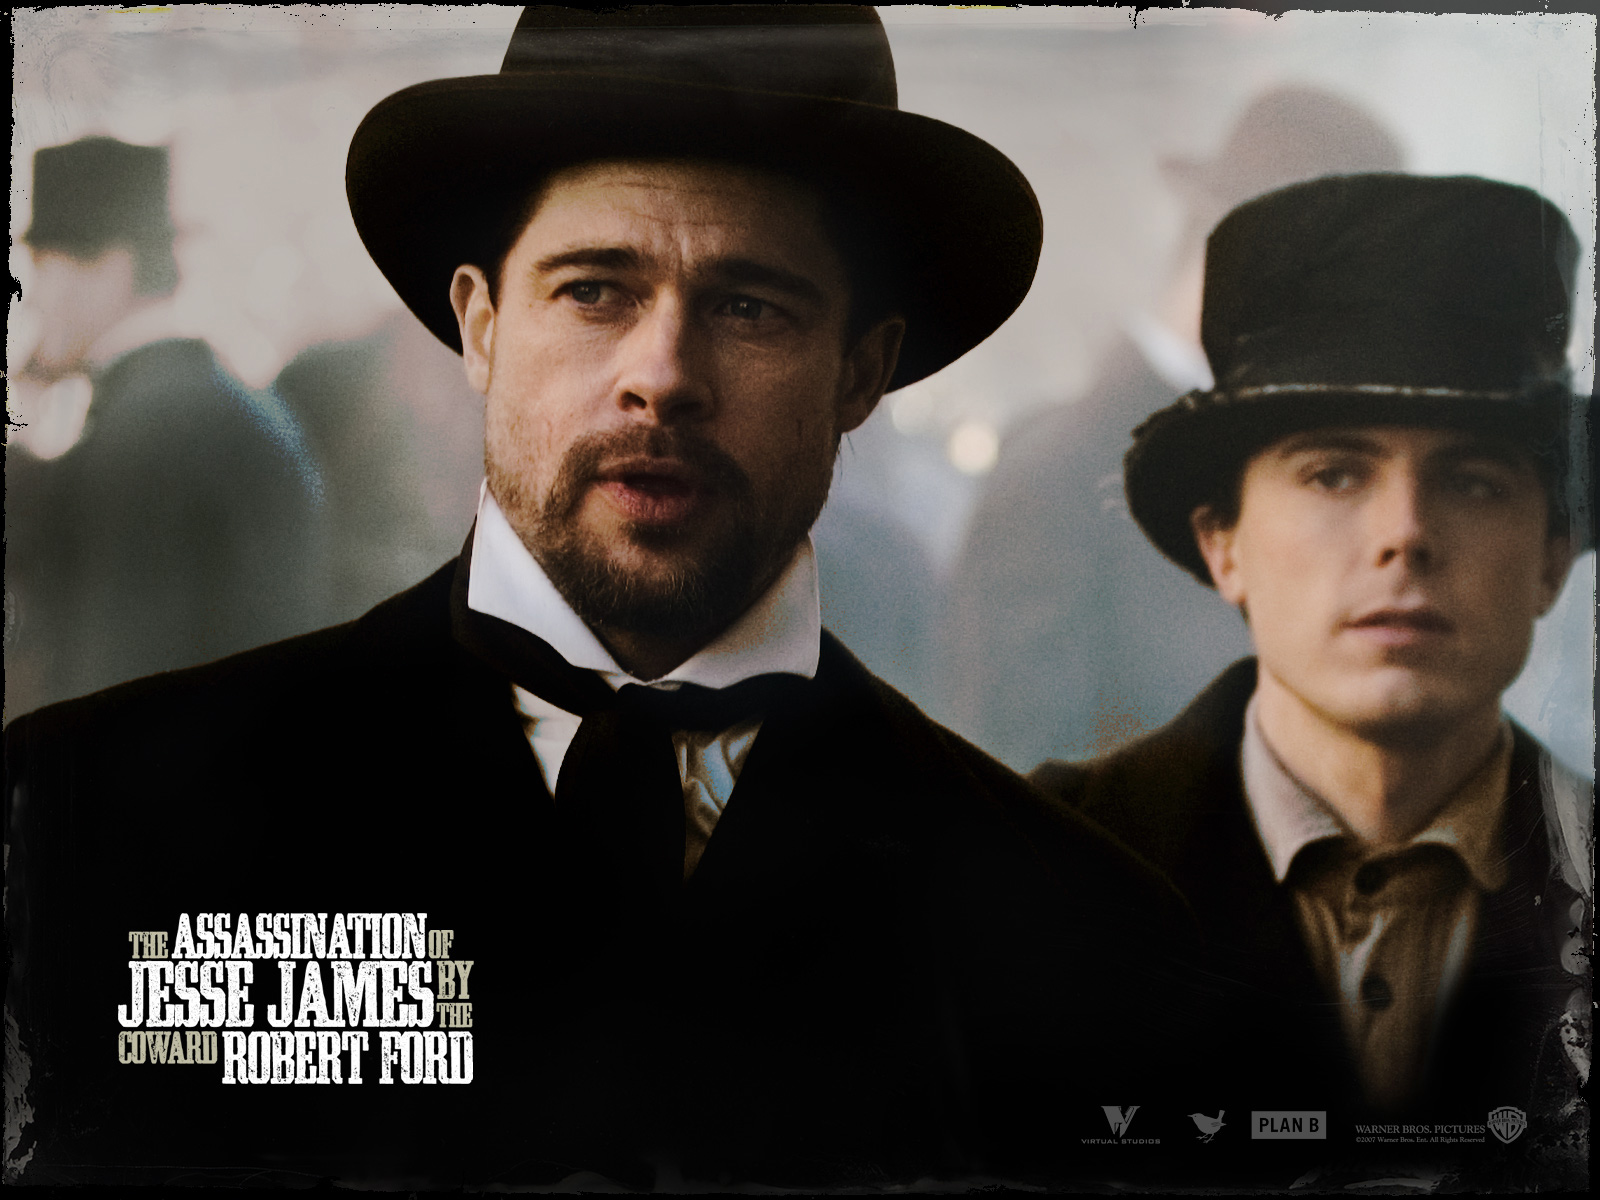 216422 Brad Pitt Casey Affleck The Assassination Of Jesse James By The Coward Robert Ford 